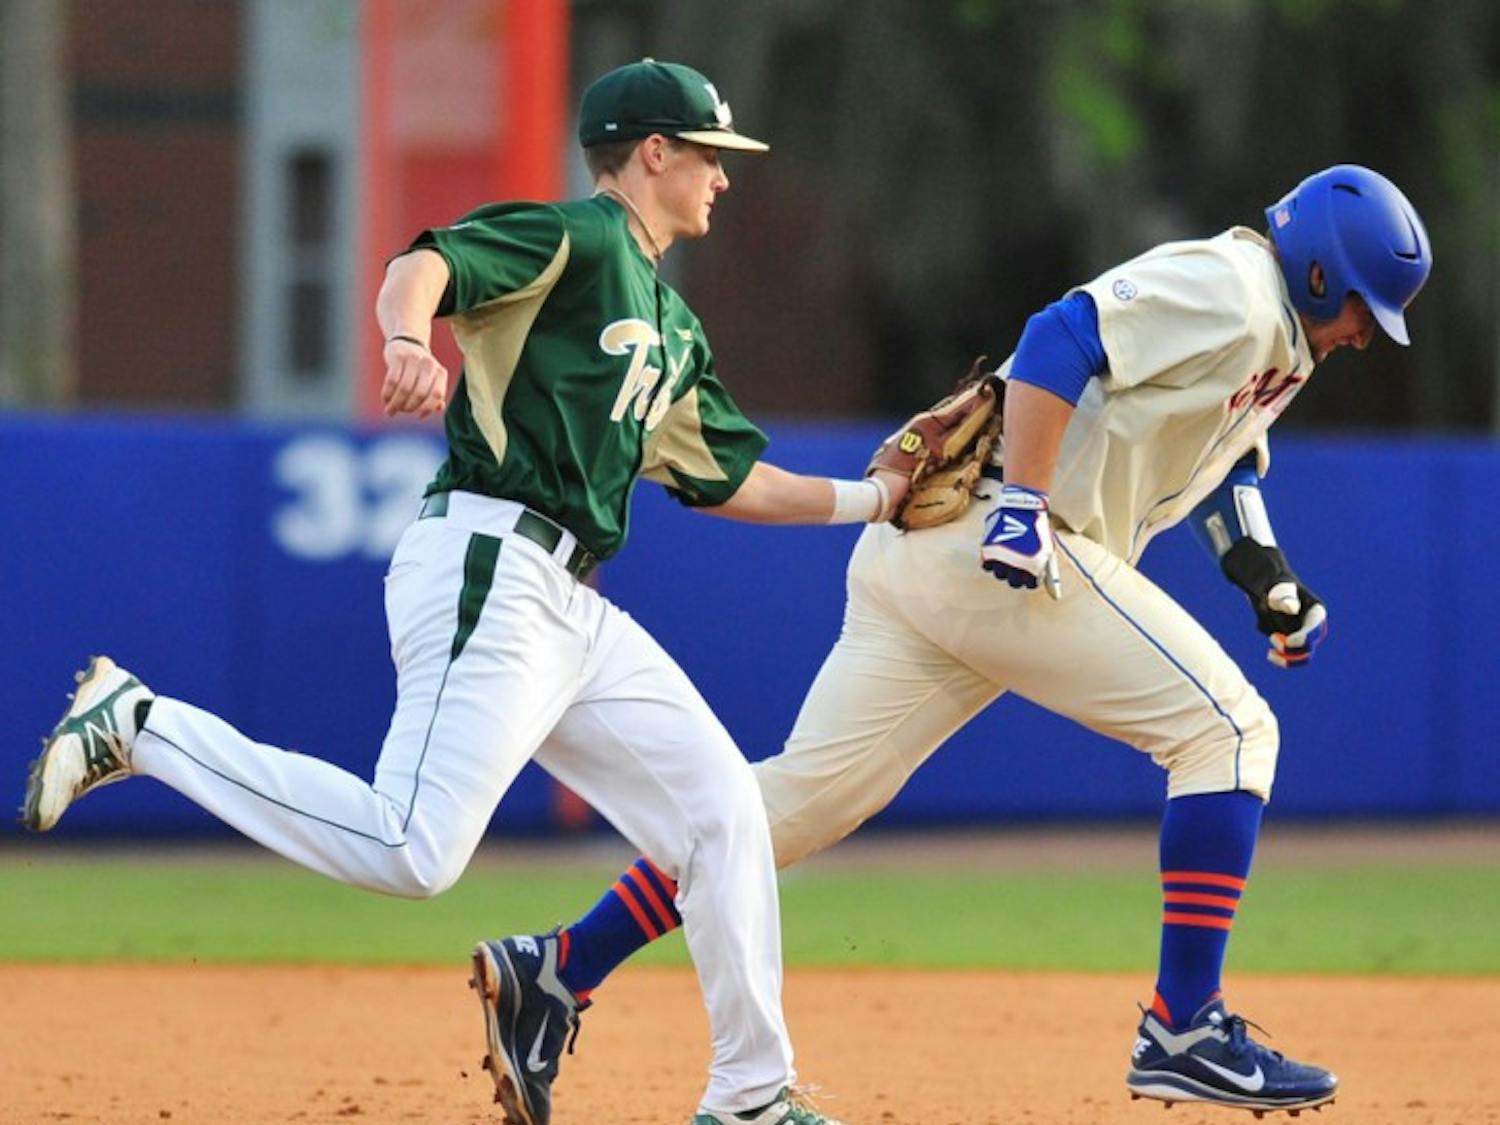 William &amp; Mary shortshop Ryan Williams (left) tags Florida catcher Mike Zunino (right) during a rundown in Saturday’s game, a 5-1 UF win. Zunino injured his hamstring during the play.